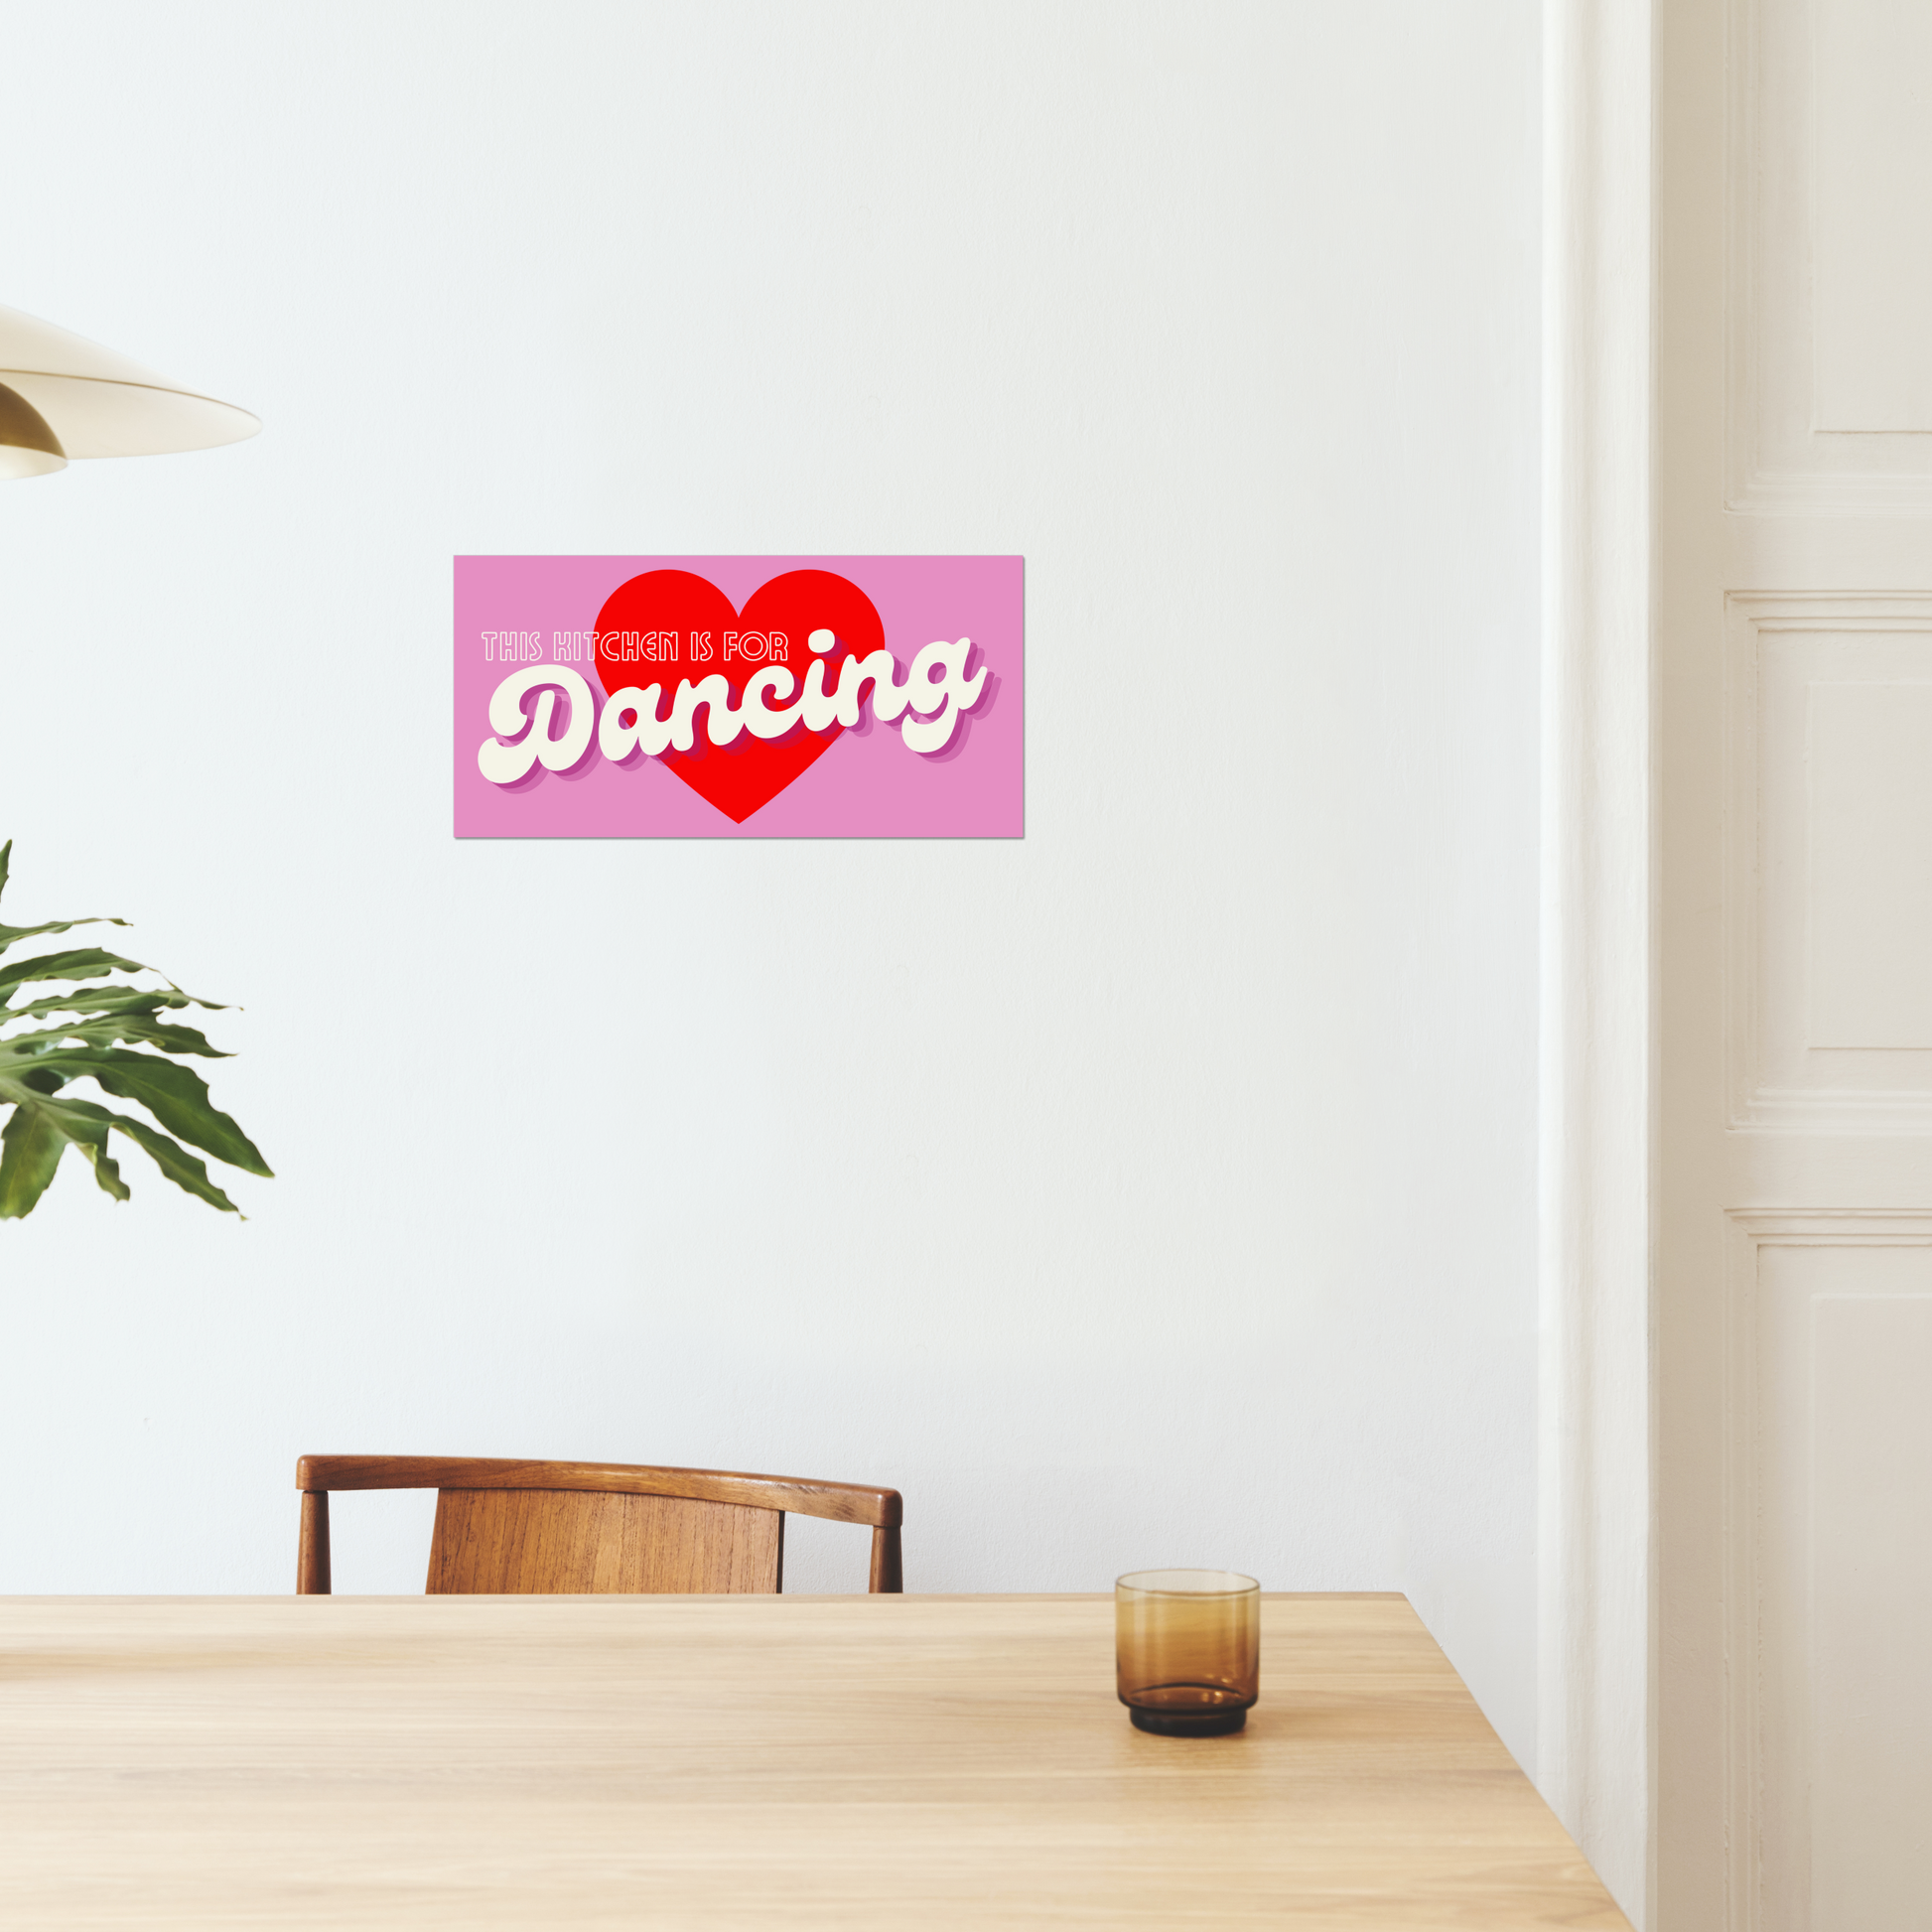 This Kitchen Is For Dancing is the perfect addition to any kitchen with a sense of fun and quirkiness. The catchy phrase and retro pink style make it a truly unique art print that is sure to bring a smile to your face every time you see it.